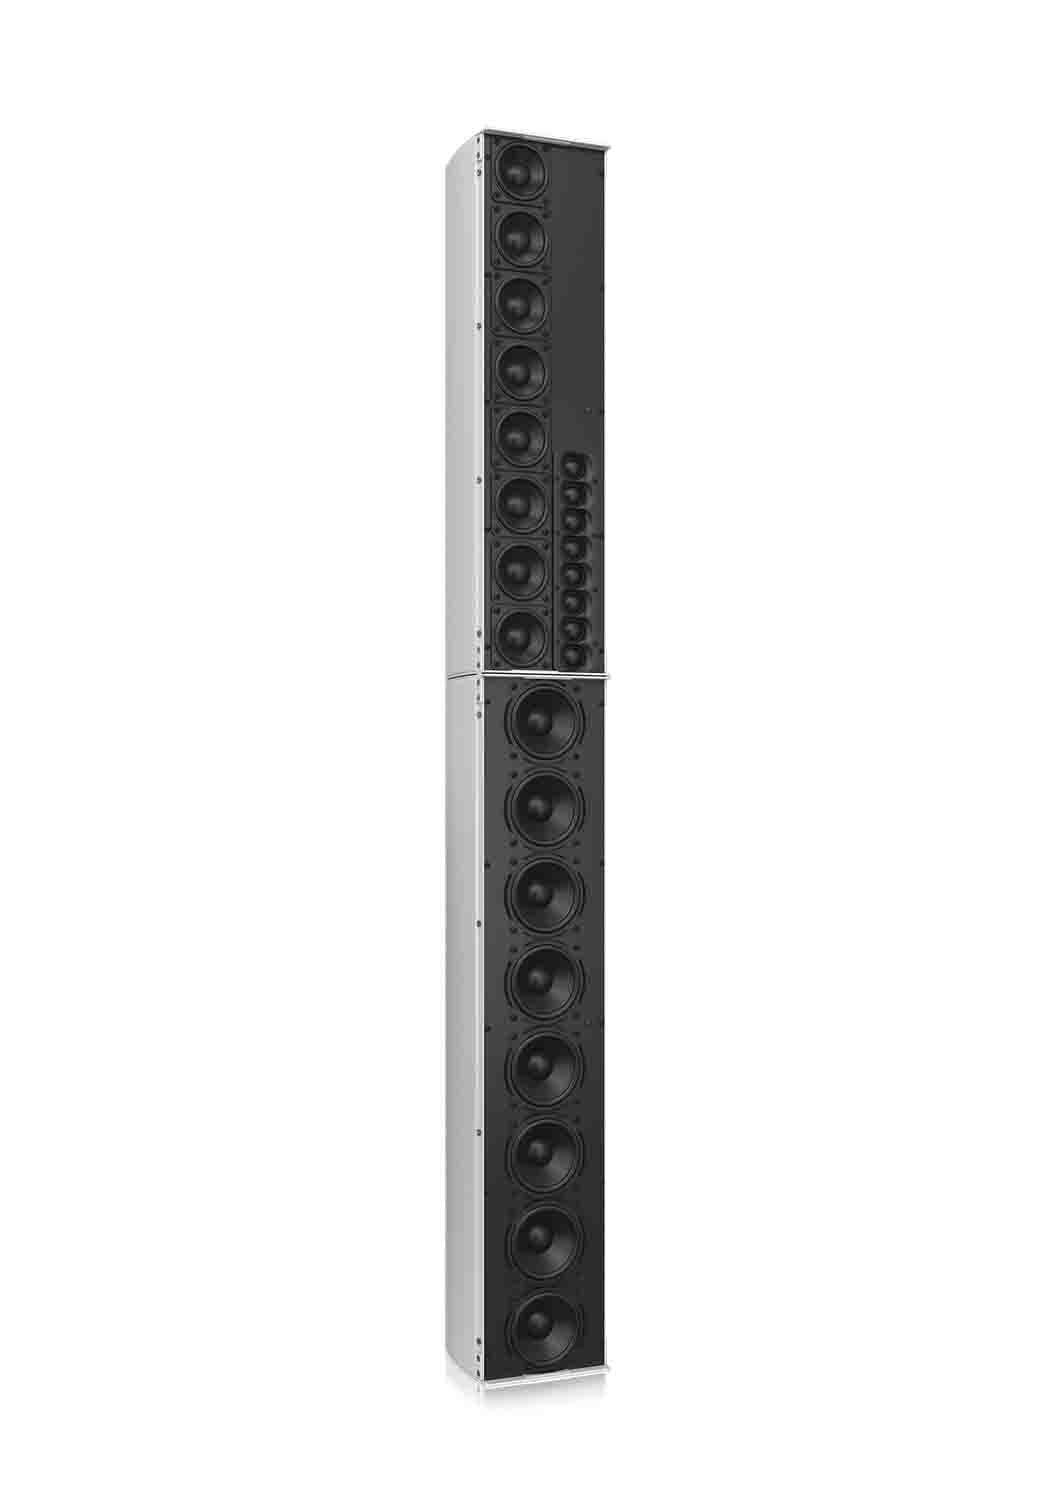 Tannoy QFLEX 24-WP Digitally Steerable Powered Column Array Loudspeaker with 24 Independently Controlled Drivers - Hollywood DJ